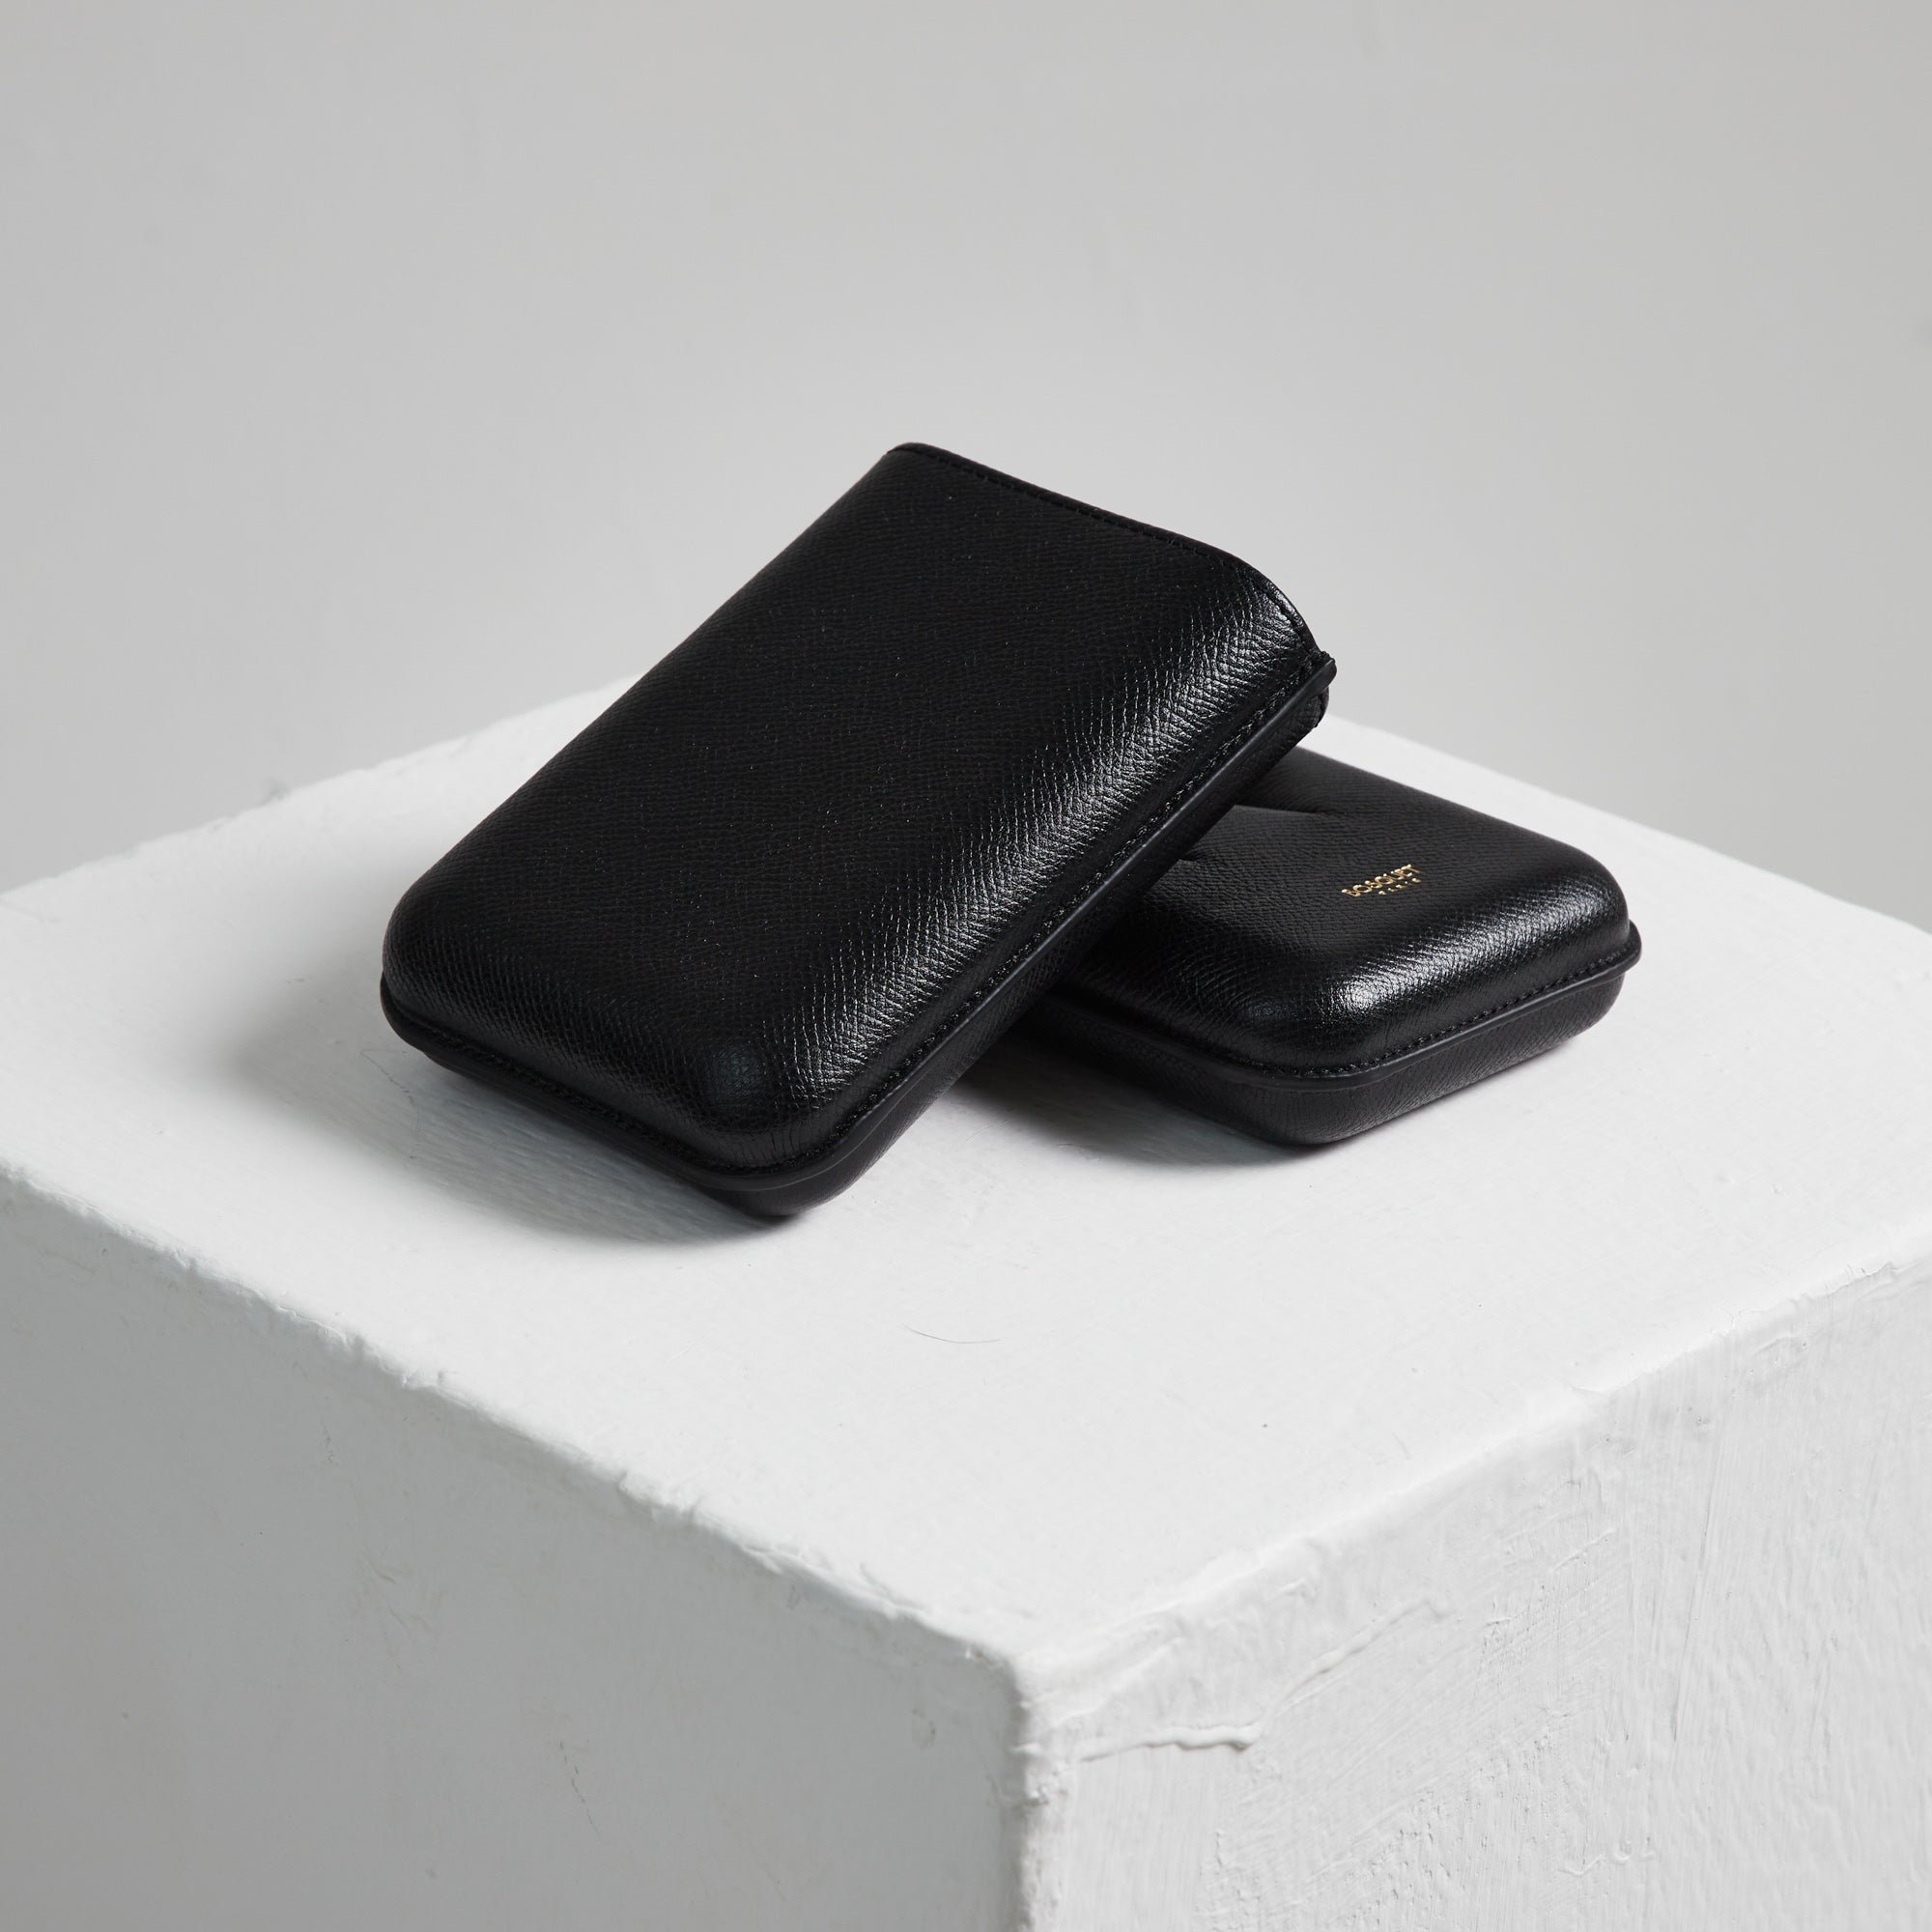 A black leather Bosquet Smooth Black Cylindrical Leather Cigar Case sitting on top of a white cube.